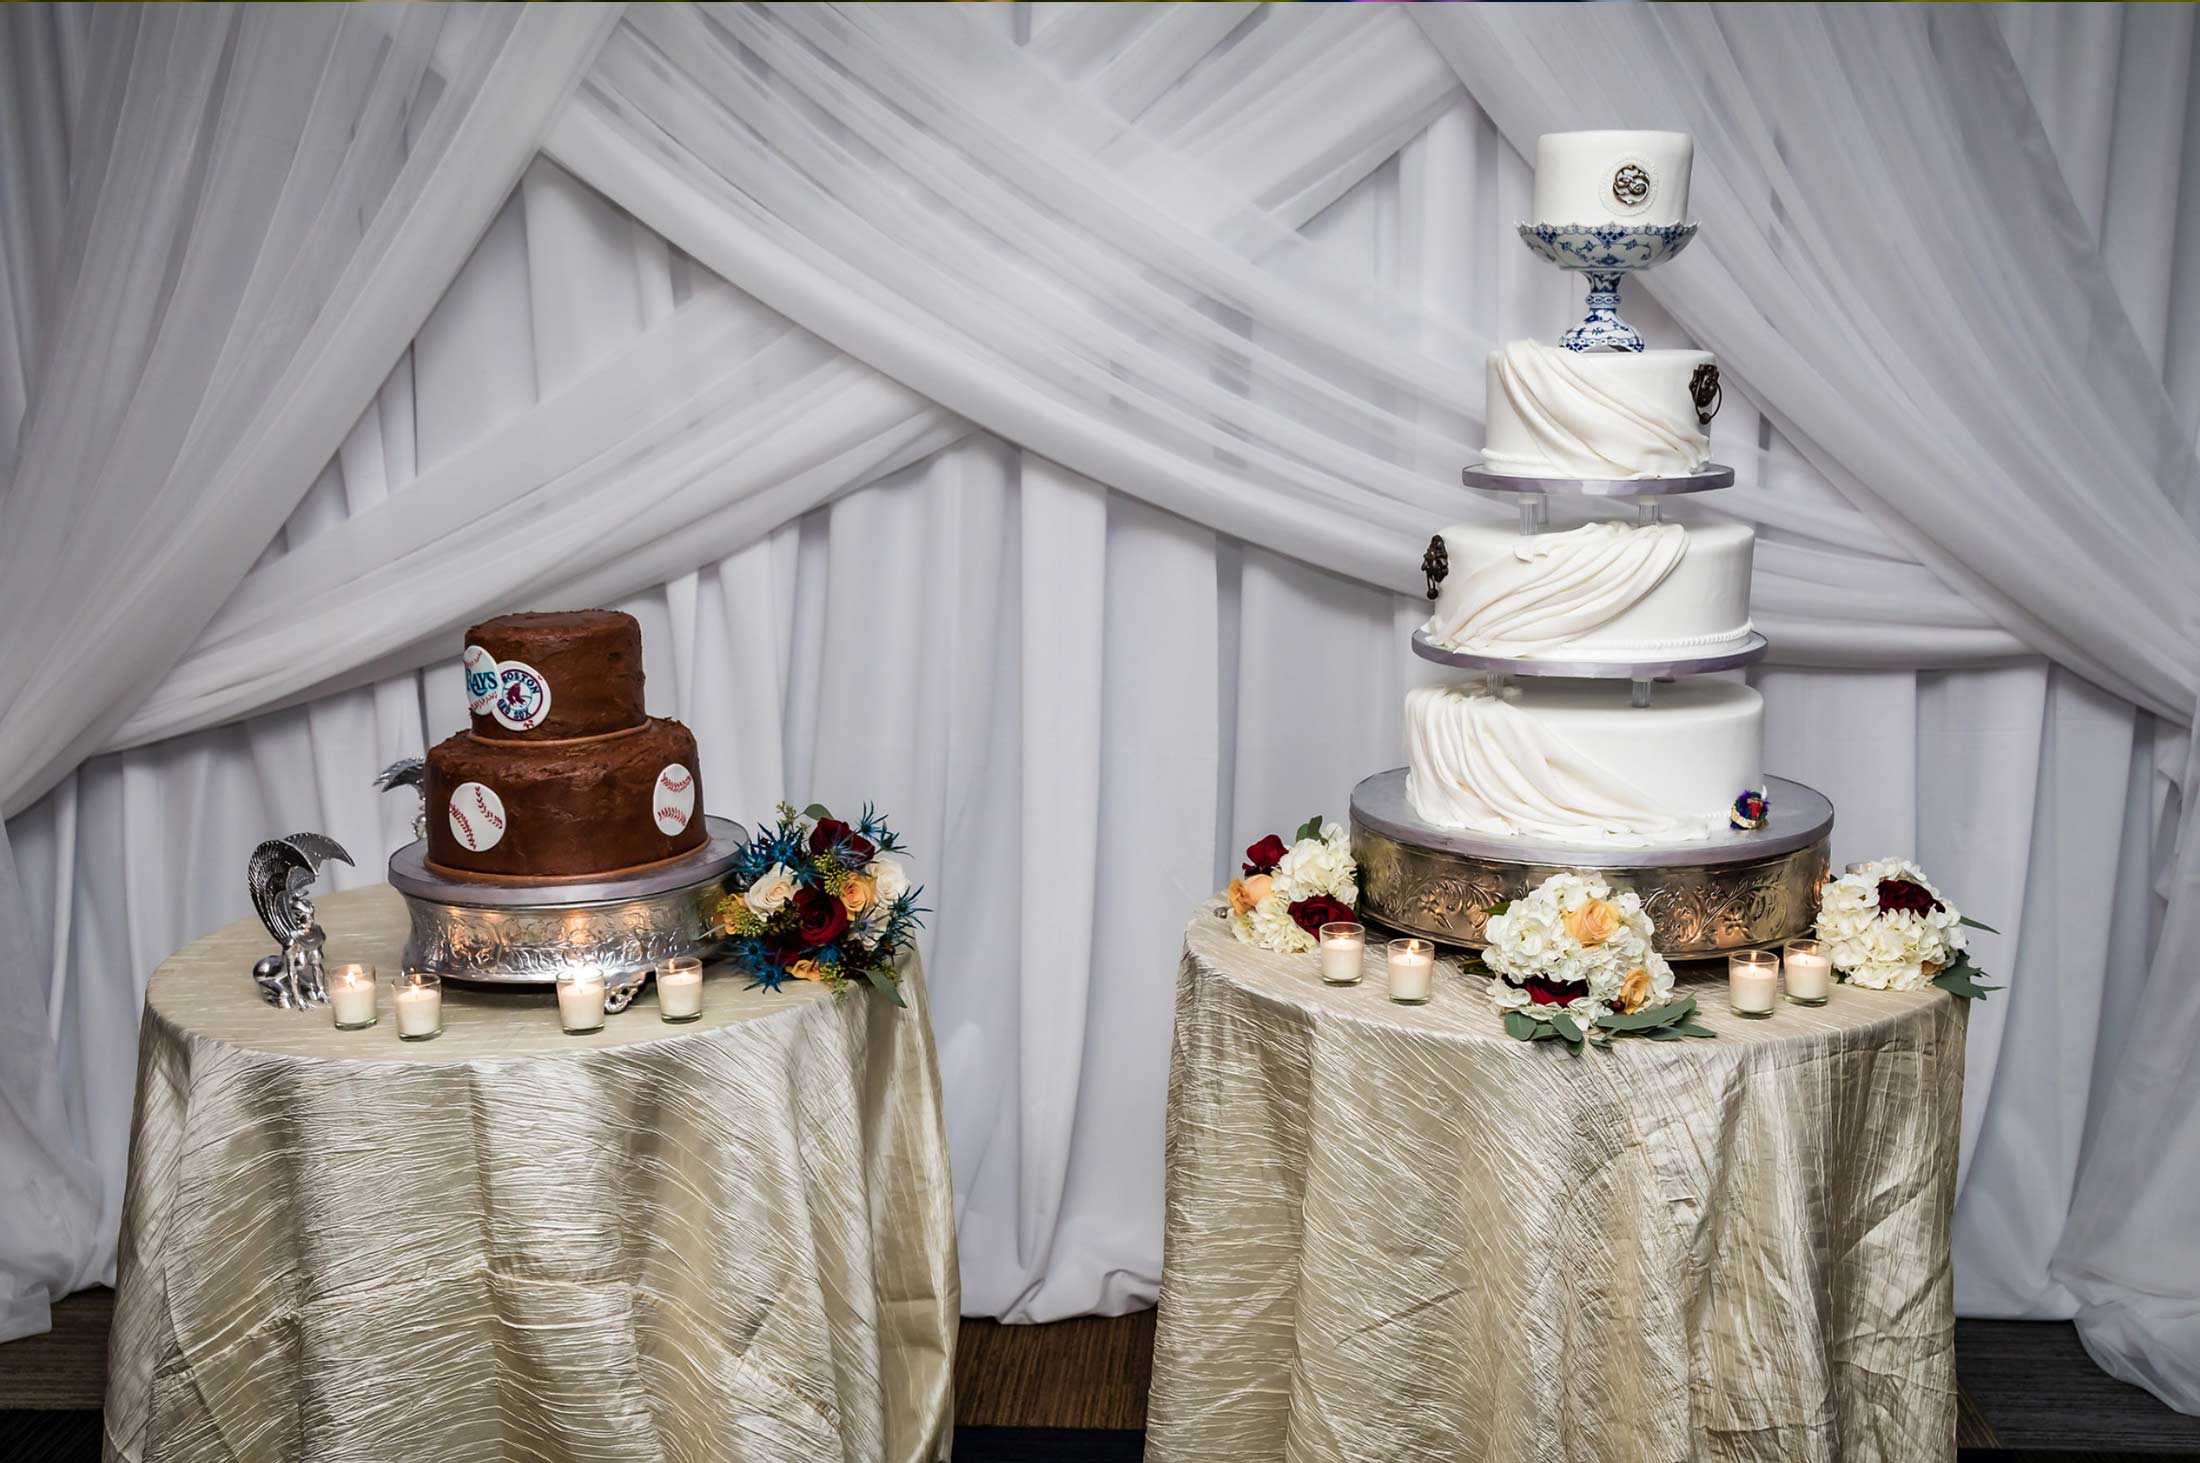 2-tier chocolate grooms cake and 4-tier wedding cake on two separate tables